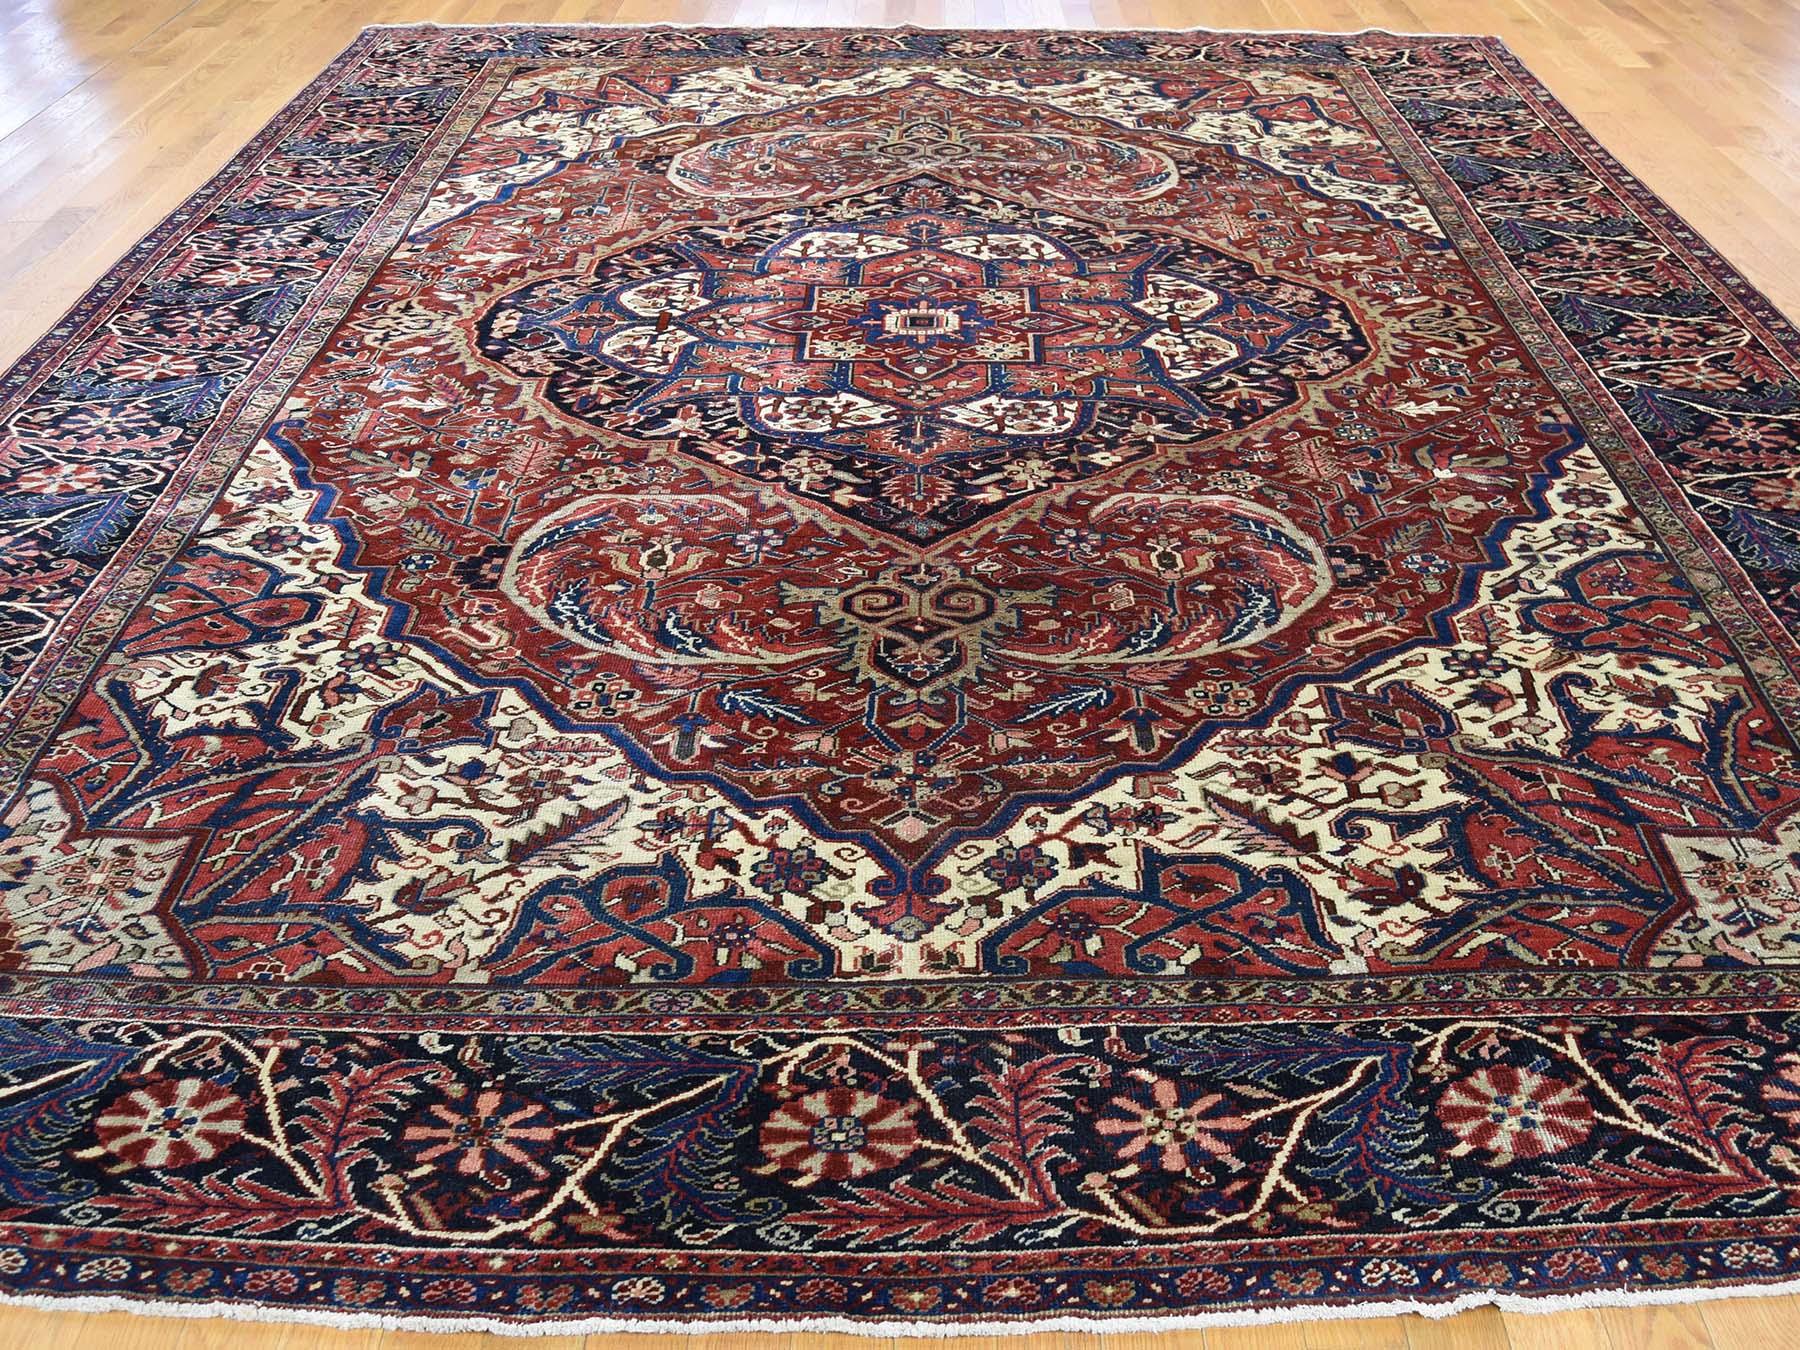 This is a genuine hand knotted oriental rug. It is not hand tufted or machine made rug. Our entire inventory is made of either hand knotted or handwoven rugs.

Bring life to your home with this fascinating hand knotted carpet. This handcrafted